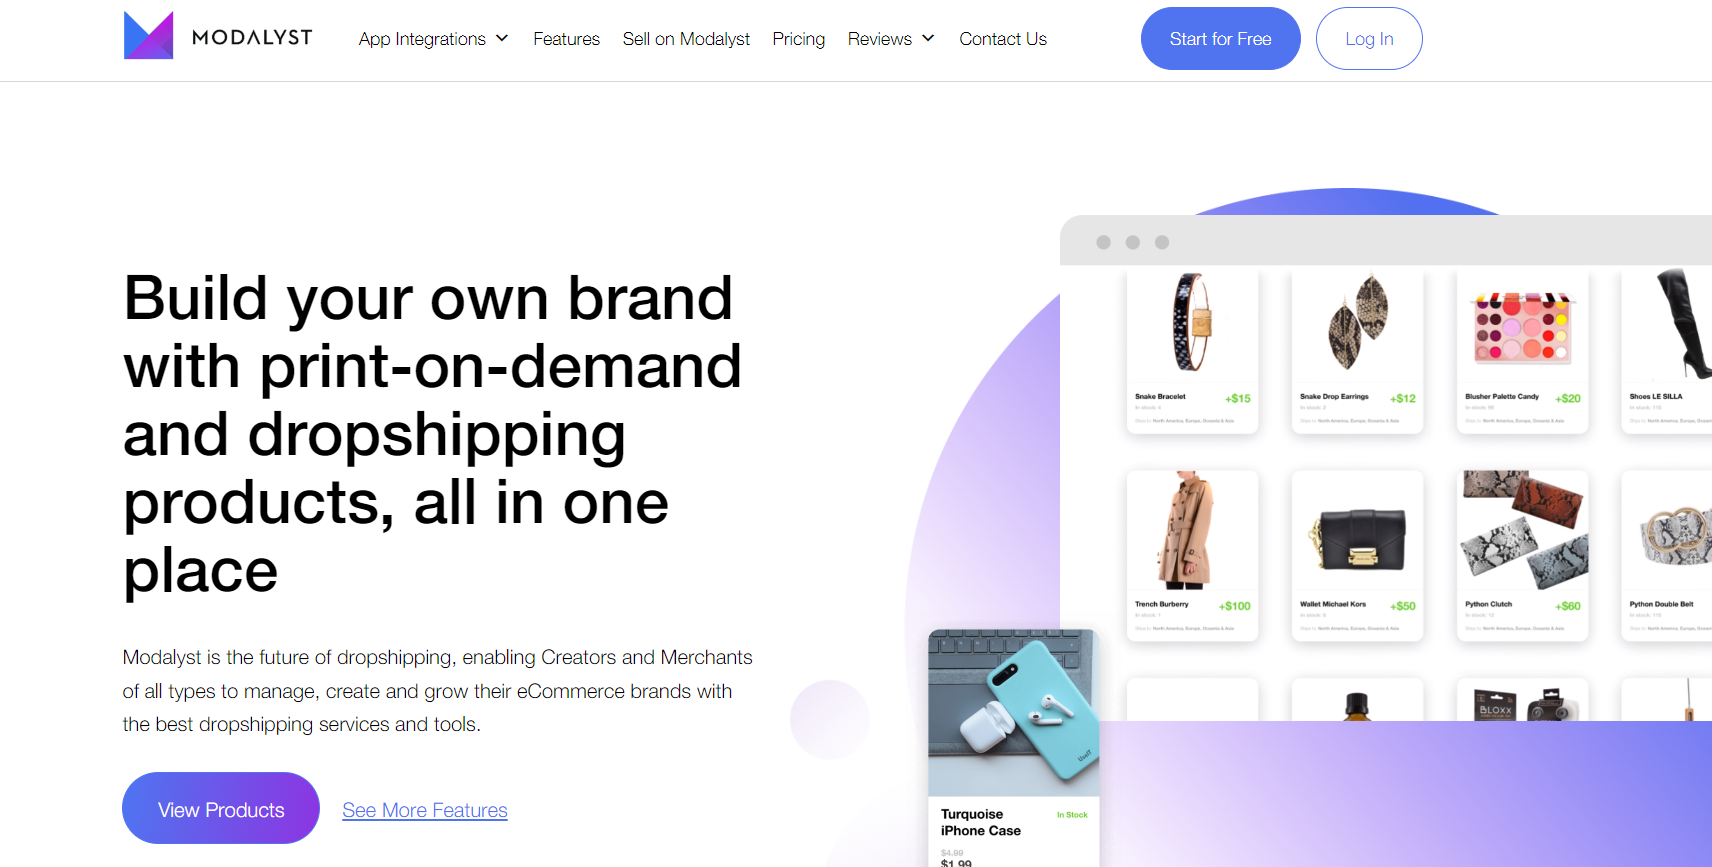 Modalyst is an automated dropshipping app that includes products from luxury brands like Calvin Klein and Dolce & Gabbana.